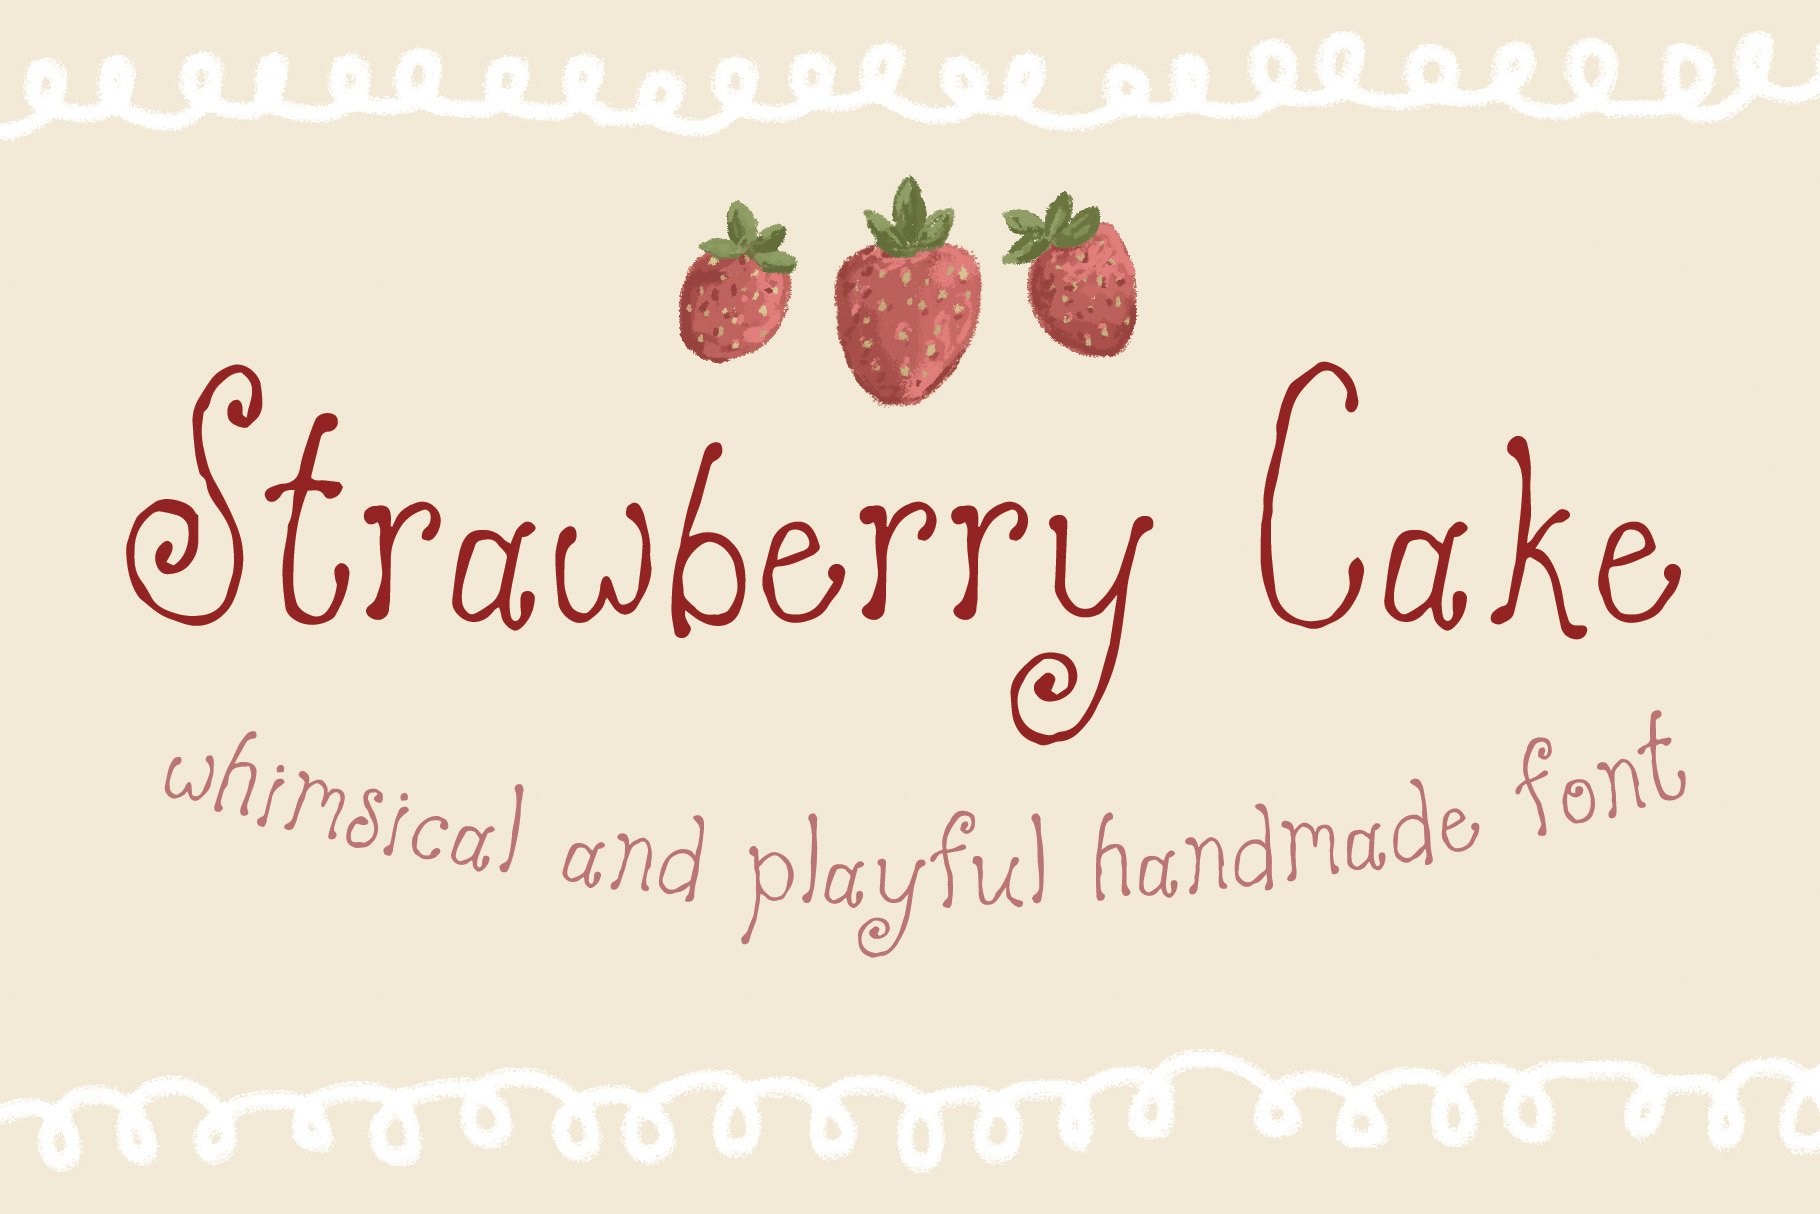 Strawberry Cake Whimsical Font cover image.